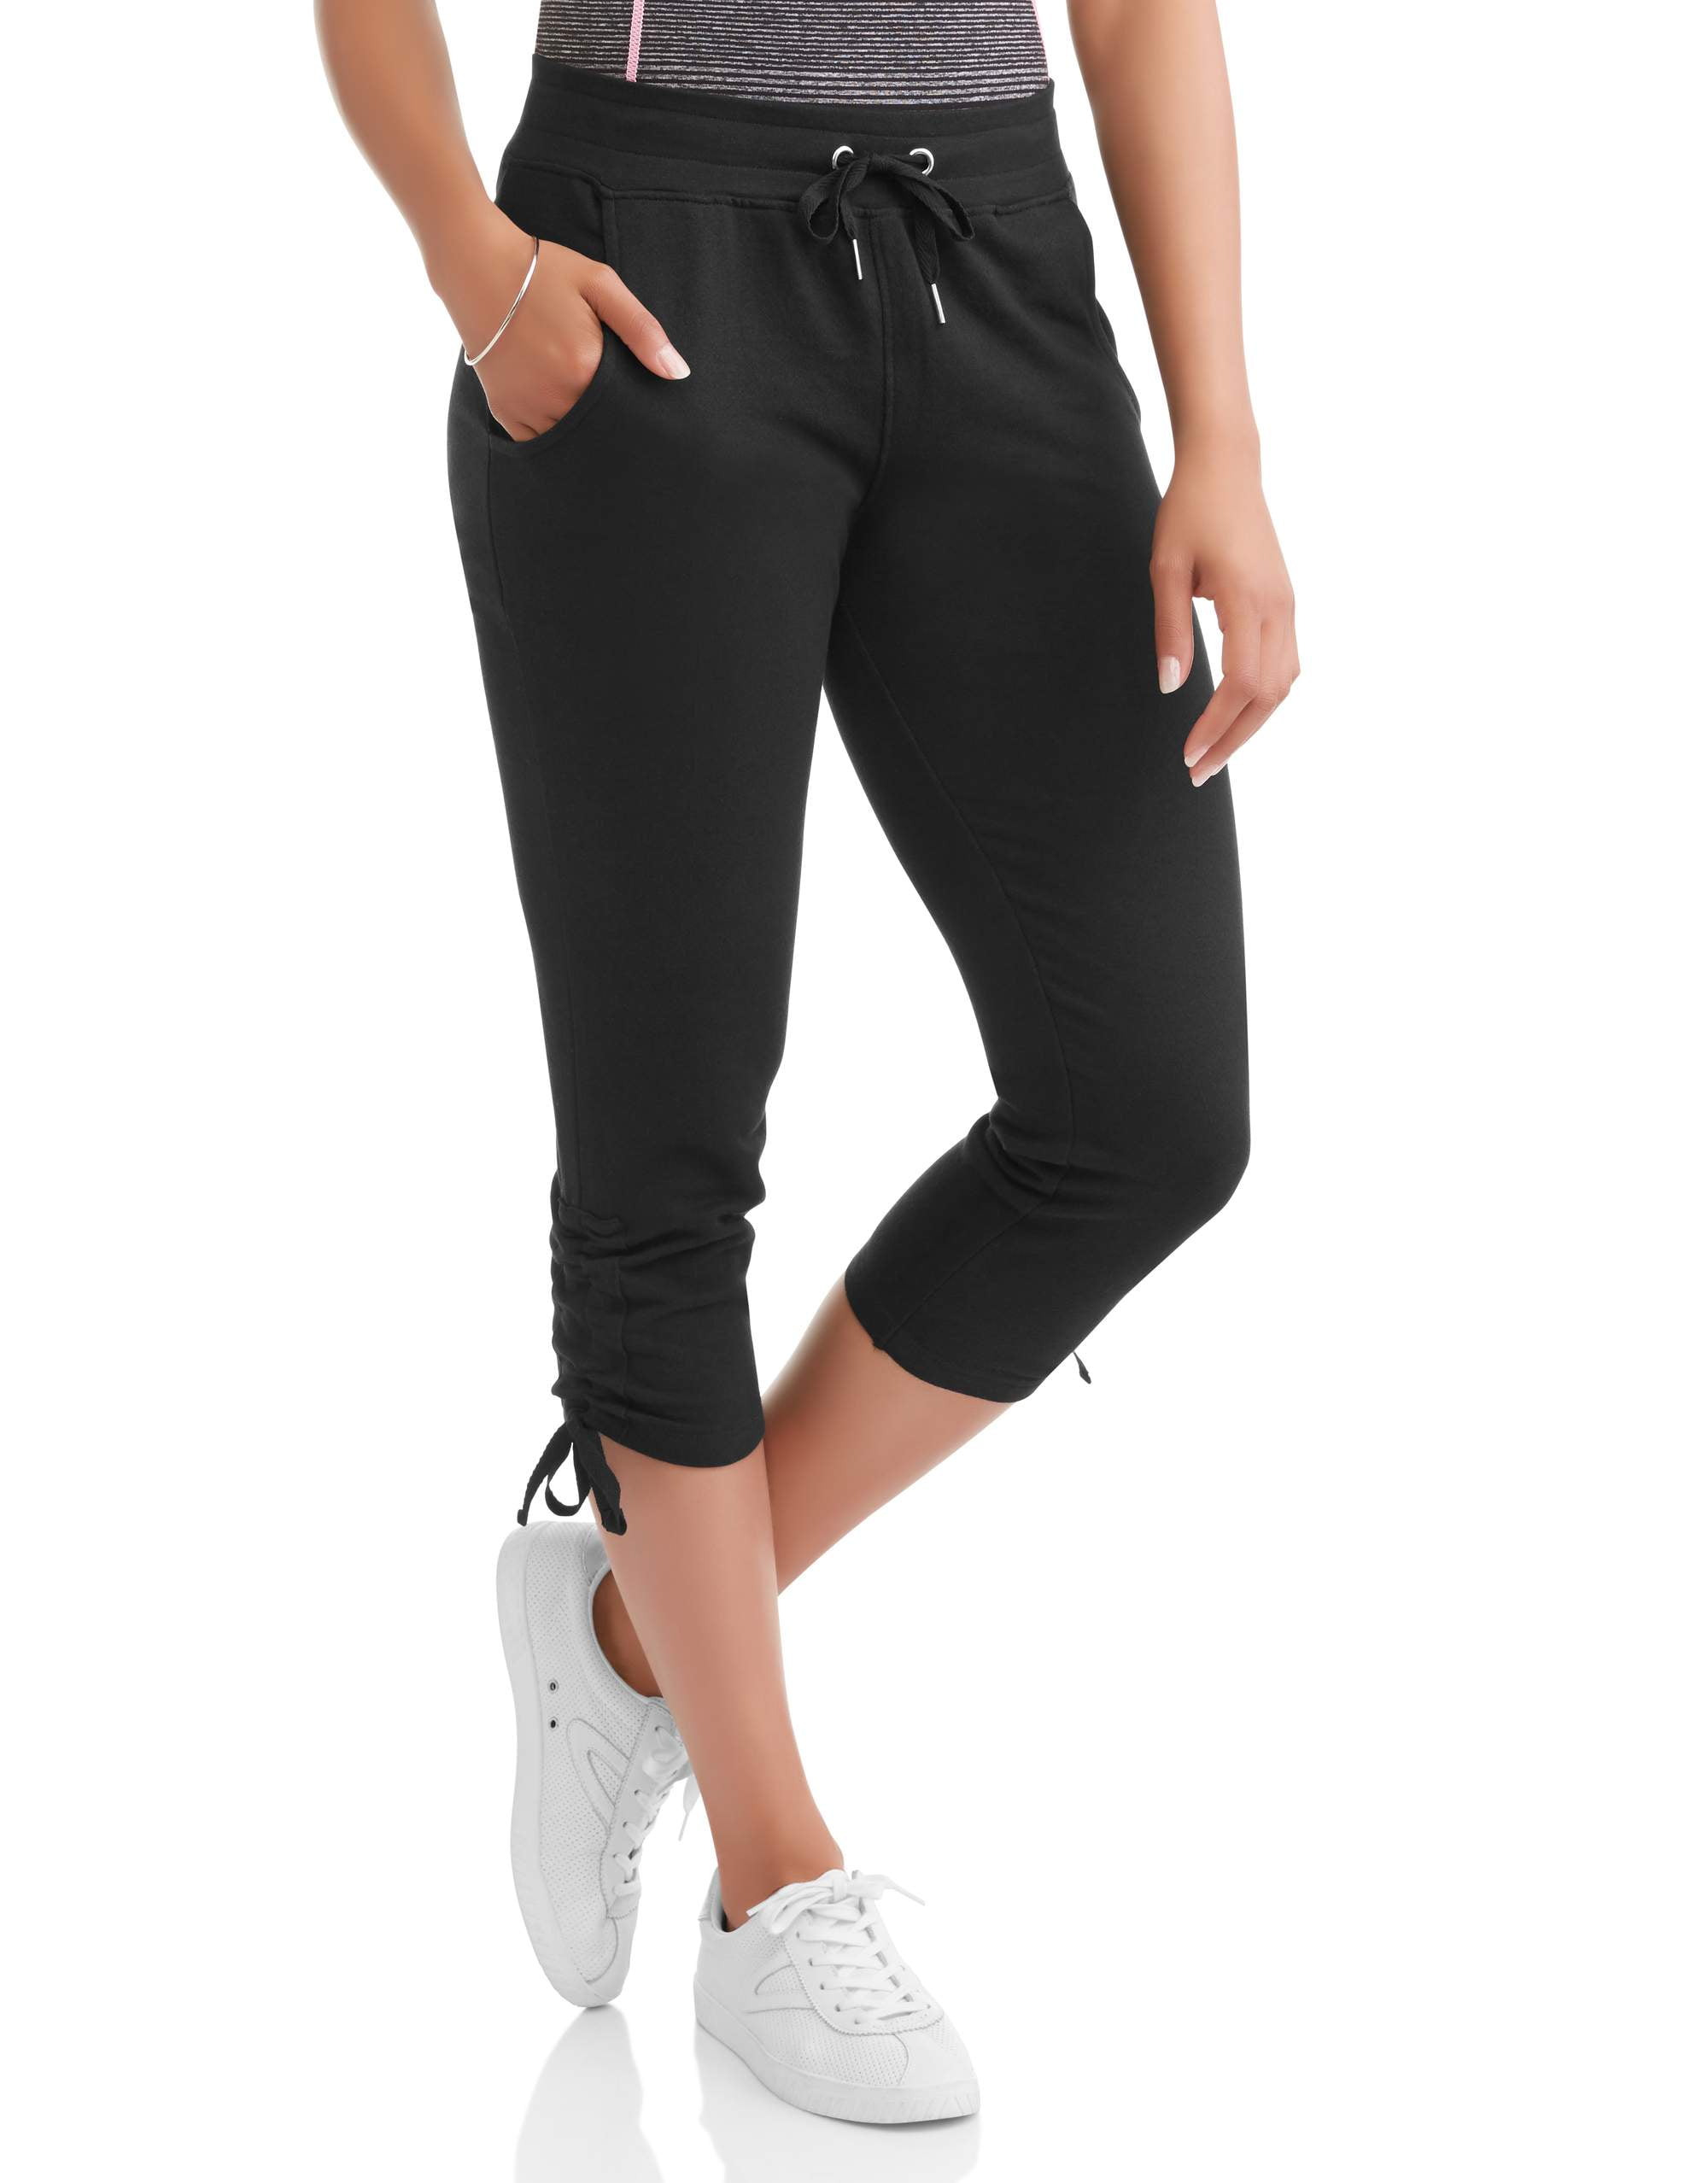 N.Y.L Sport Women's Athleisure Ruched Ankle French Terry Capri Jogger ...